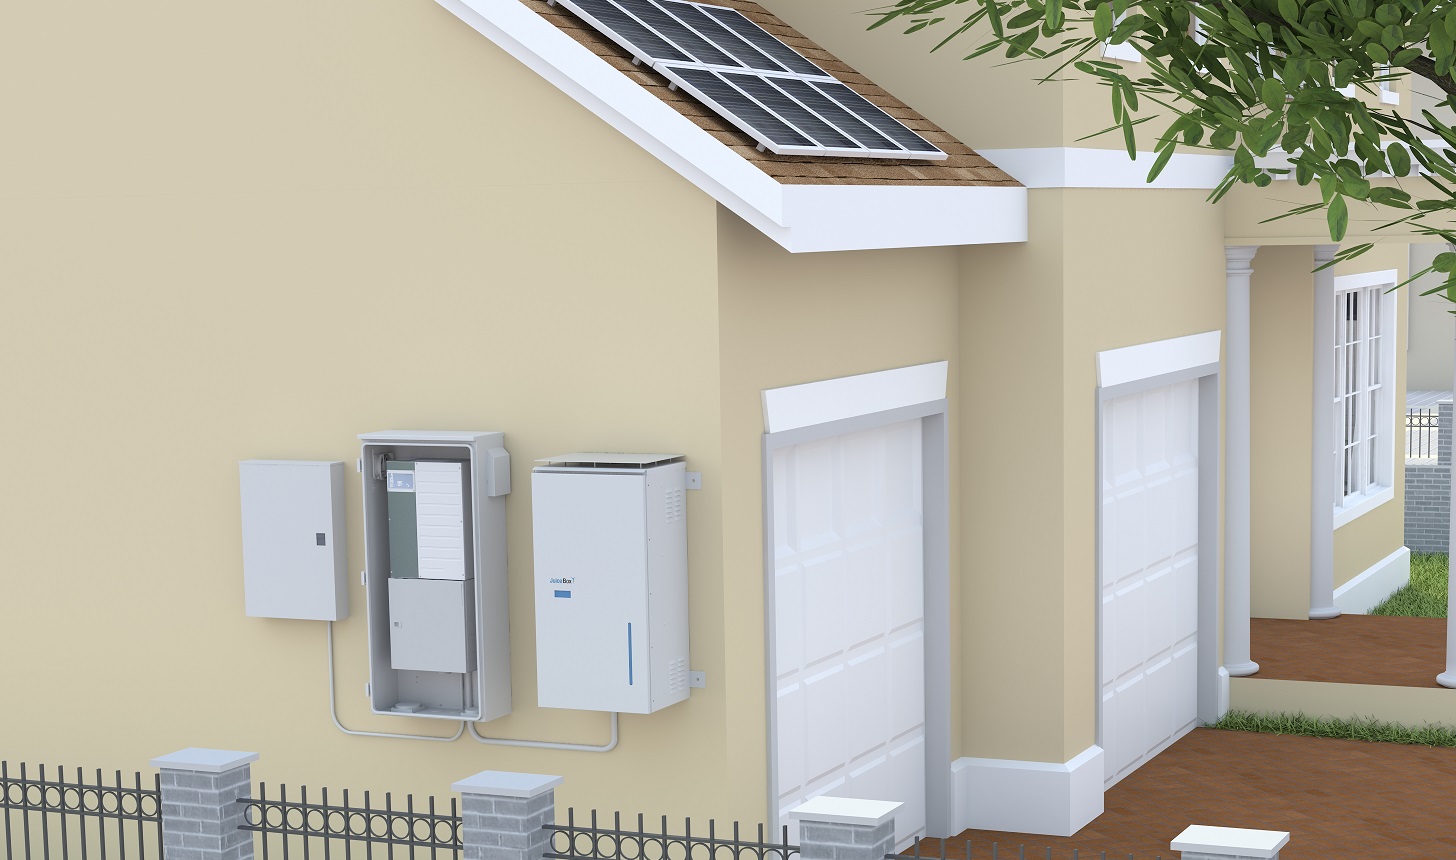 New Residential Energy Storage System for Solar and Smart Home Connectivity